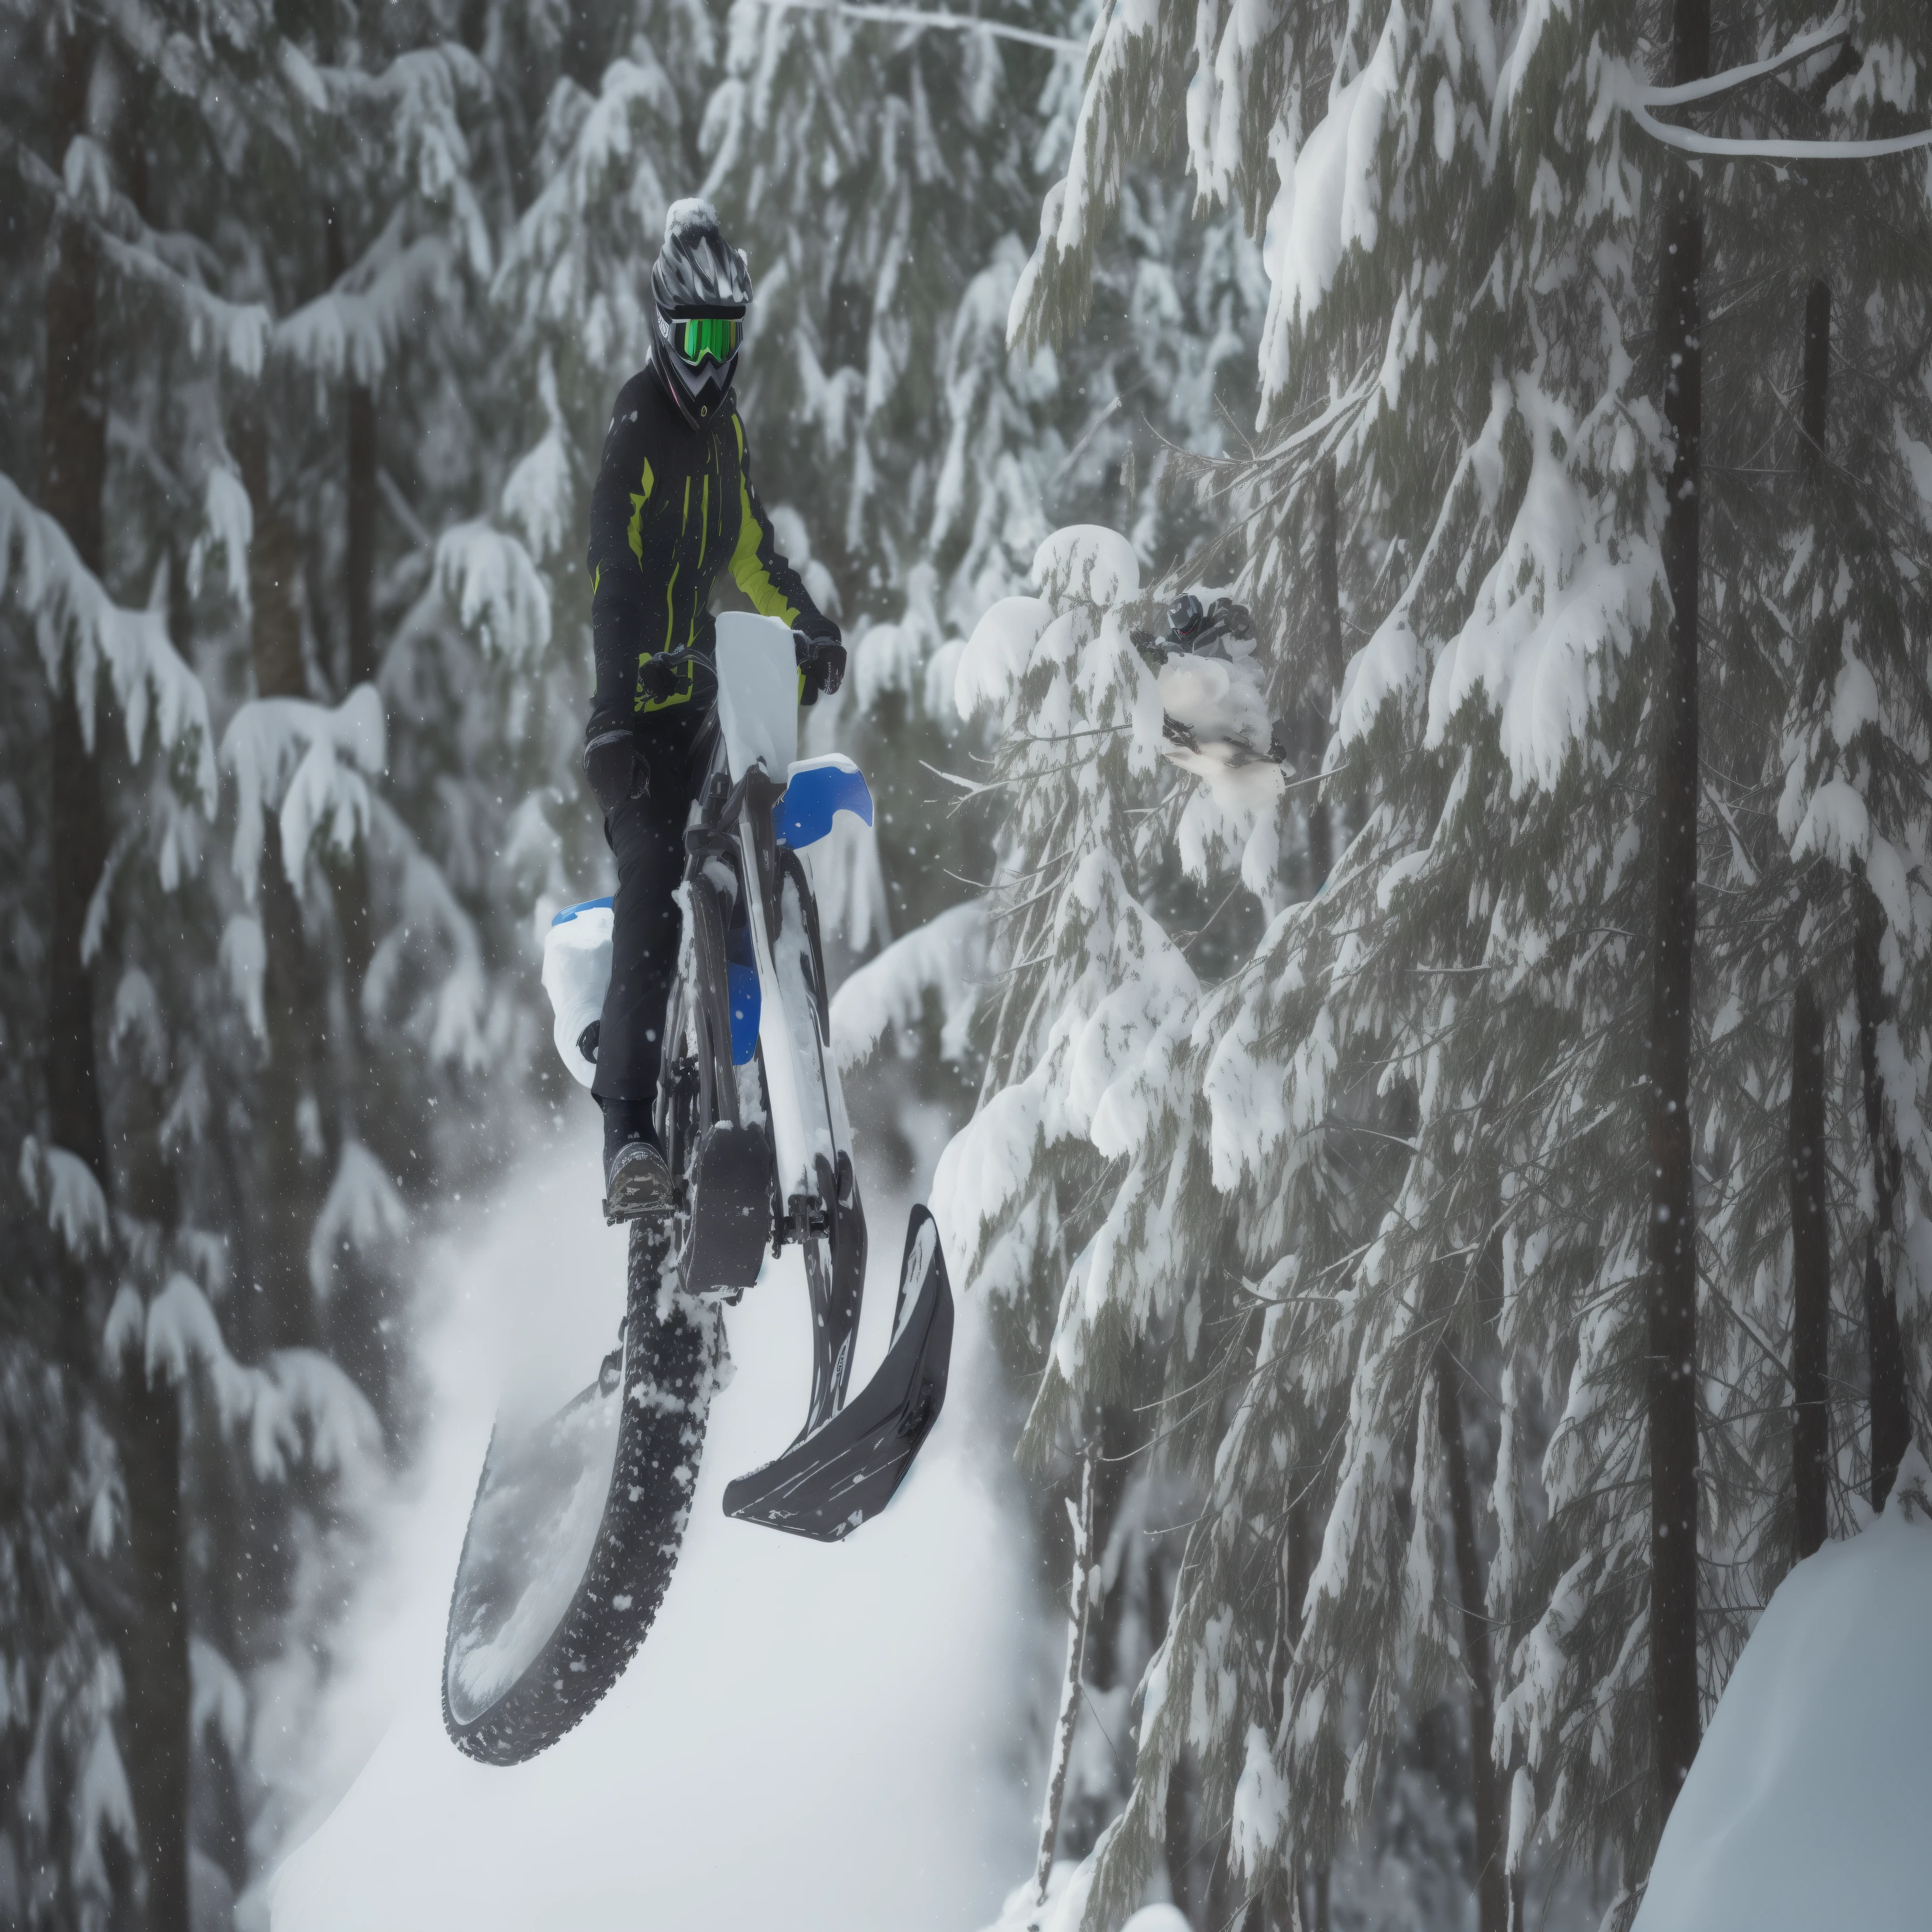 there is a man riding a snow bike in the snow, in a snowy forest setting, riding, skidding, having a good time, profile shot, into glory ride, colour, only snow in the background, photos, gpus go brrr, 8 k frostbite 3 engine, close up angle, tight shot, abomasnow, f / 2 0